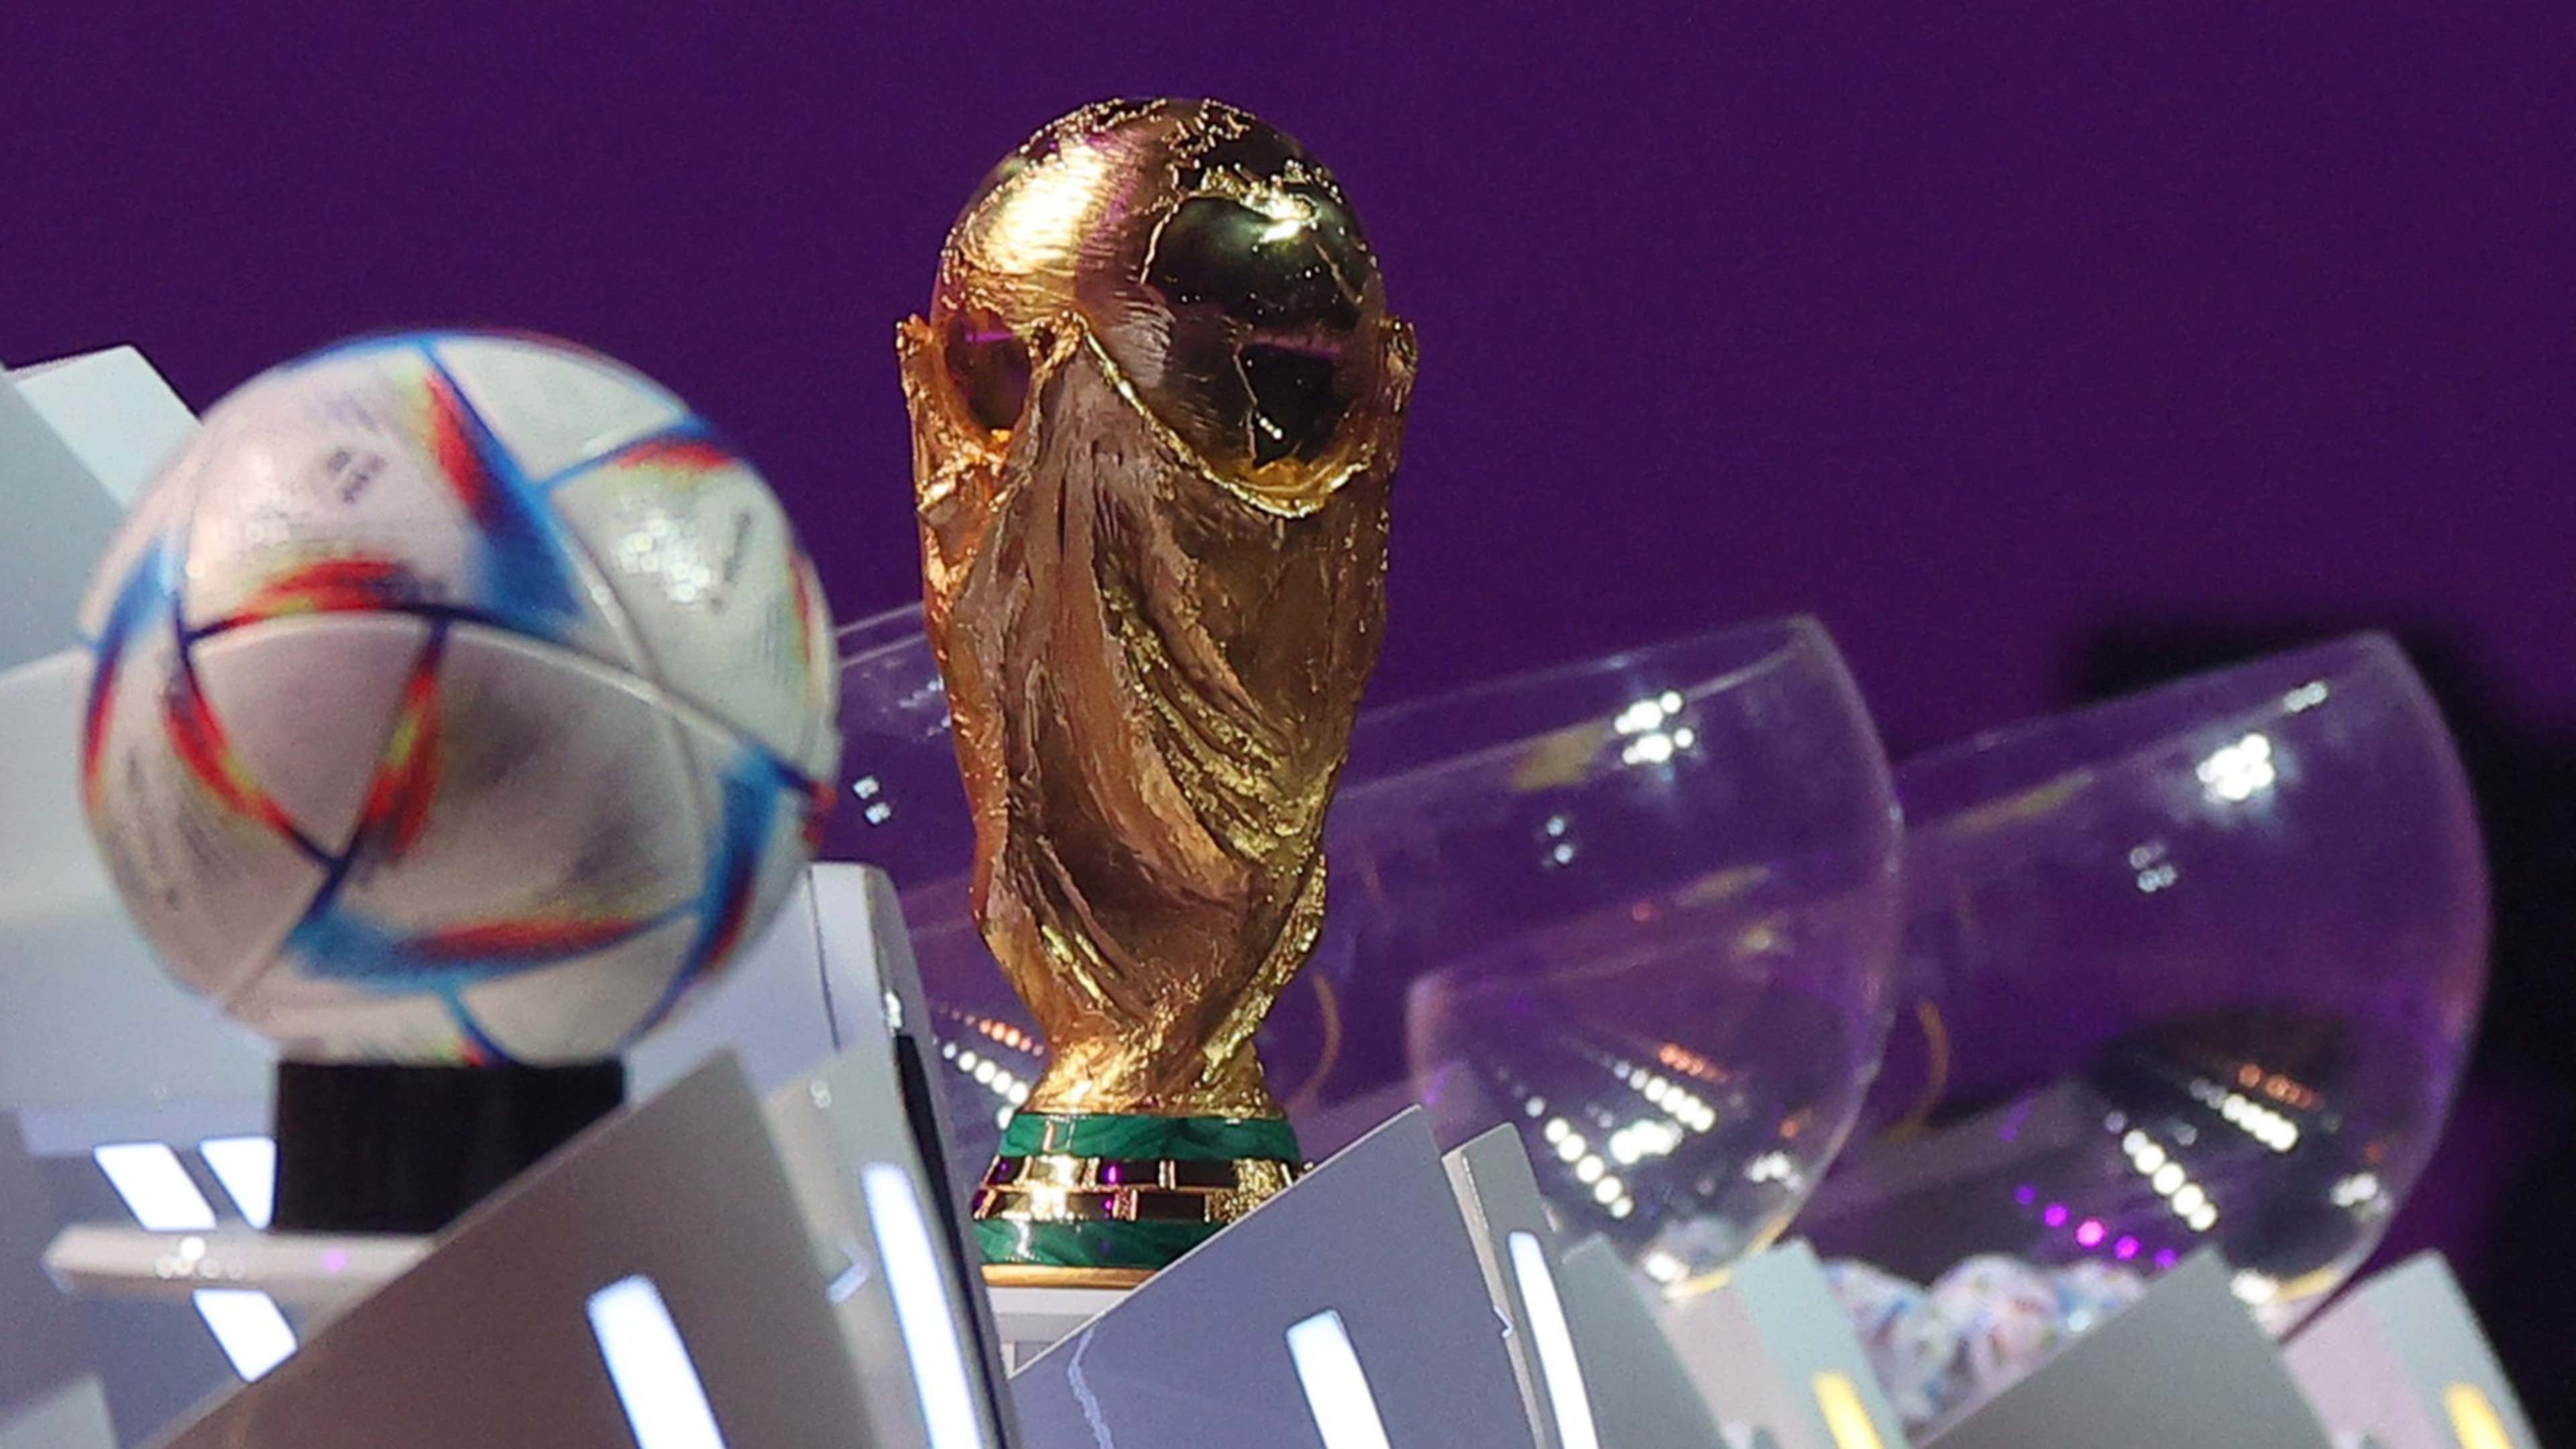 World Cup 2022 tickets: Prices & how to buy